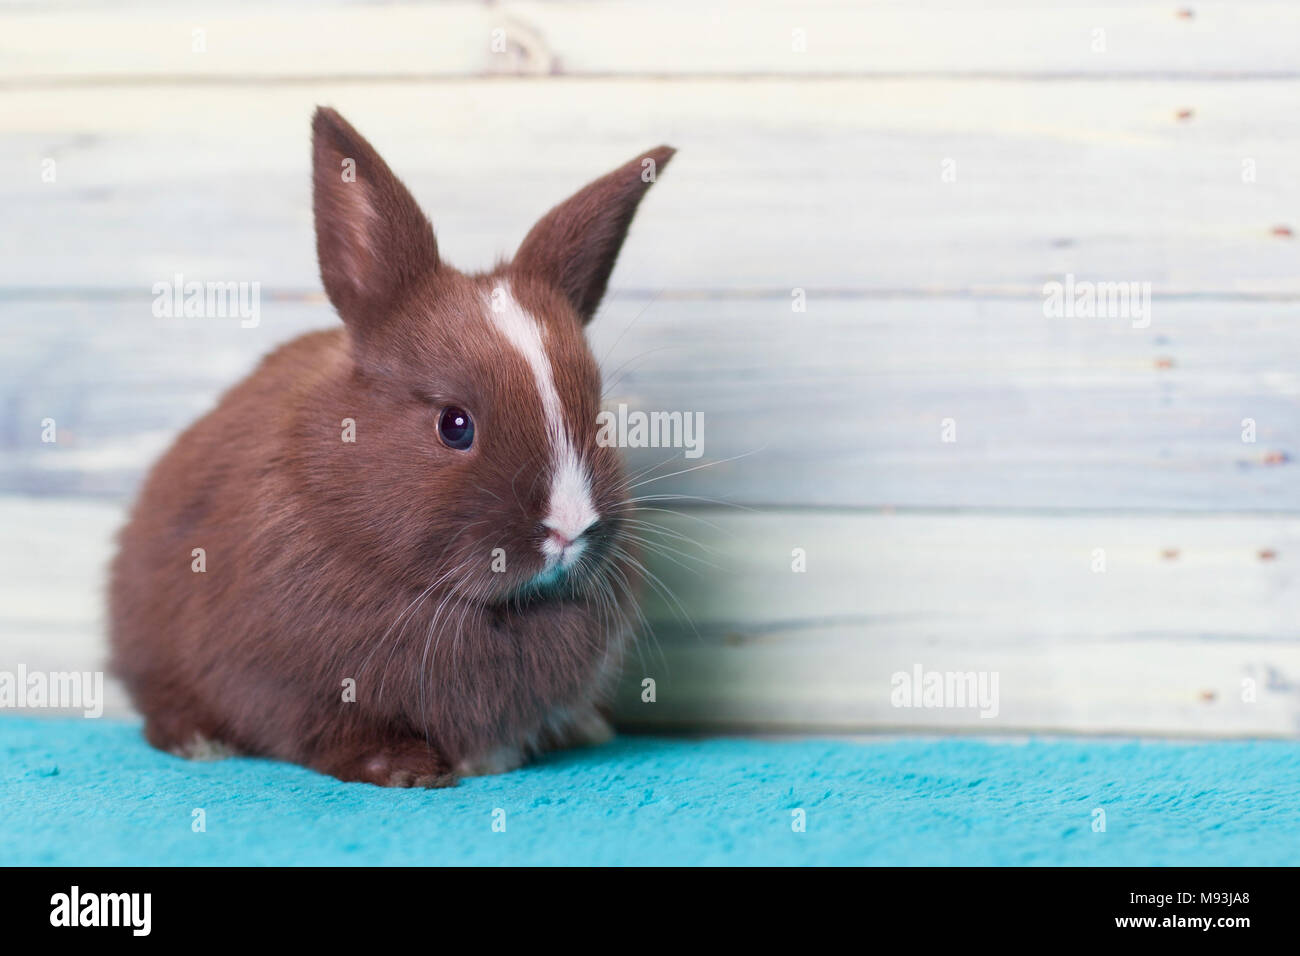 Adorable little bunny rabbit with a stripe Stock Photo